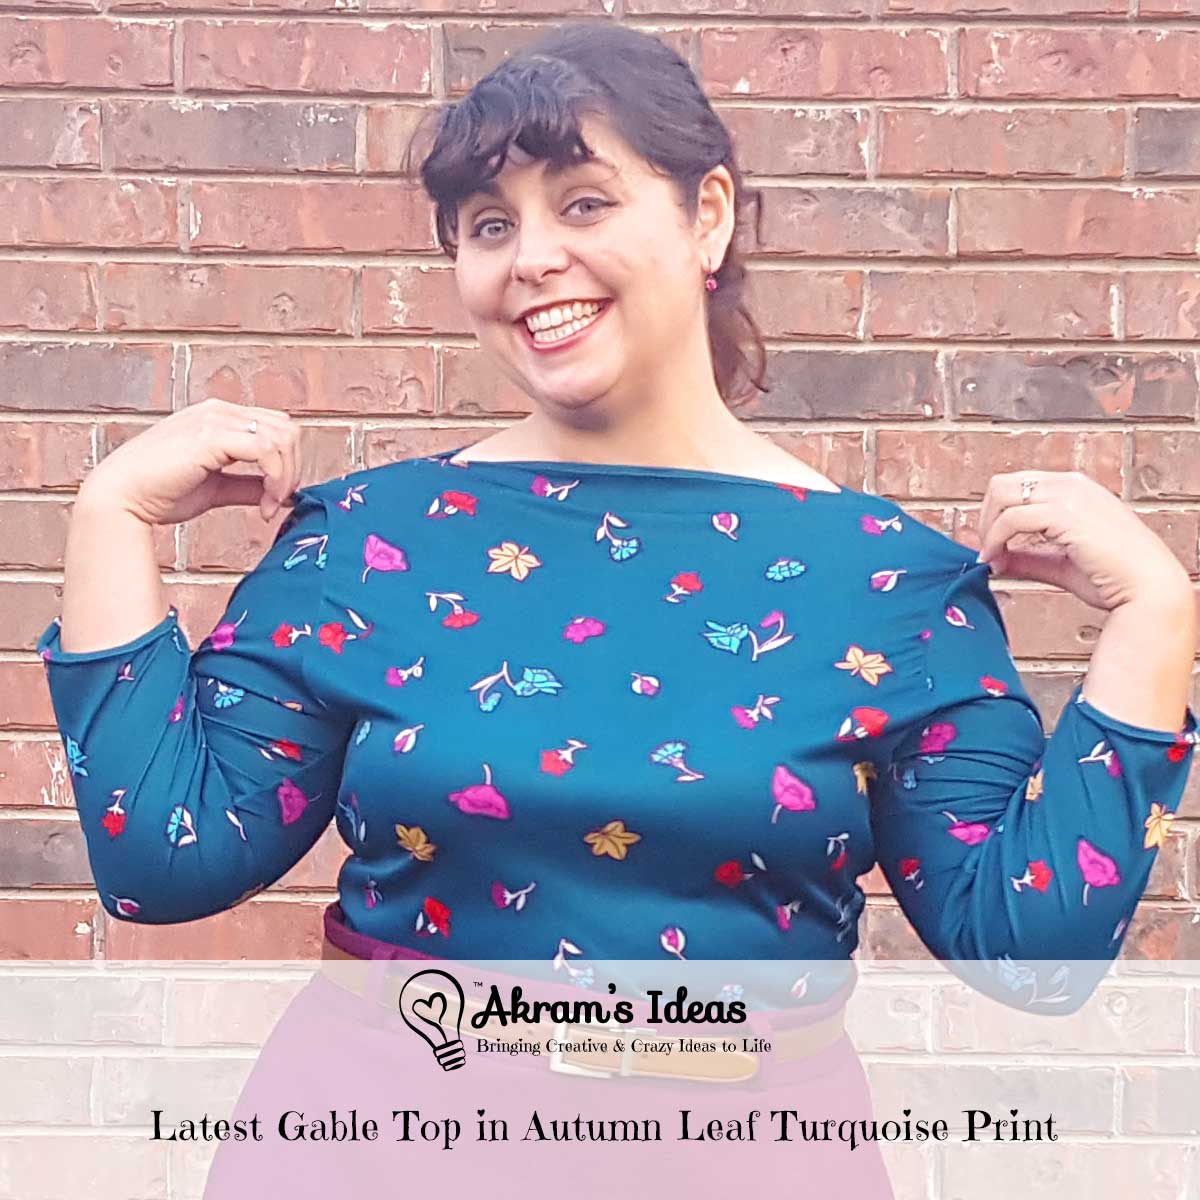 A look at my latest Gable Top pattern from Jennifer Lauren Handmade. This time I used a lovely autumn leaf print in turquoise.